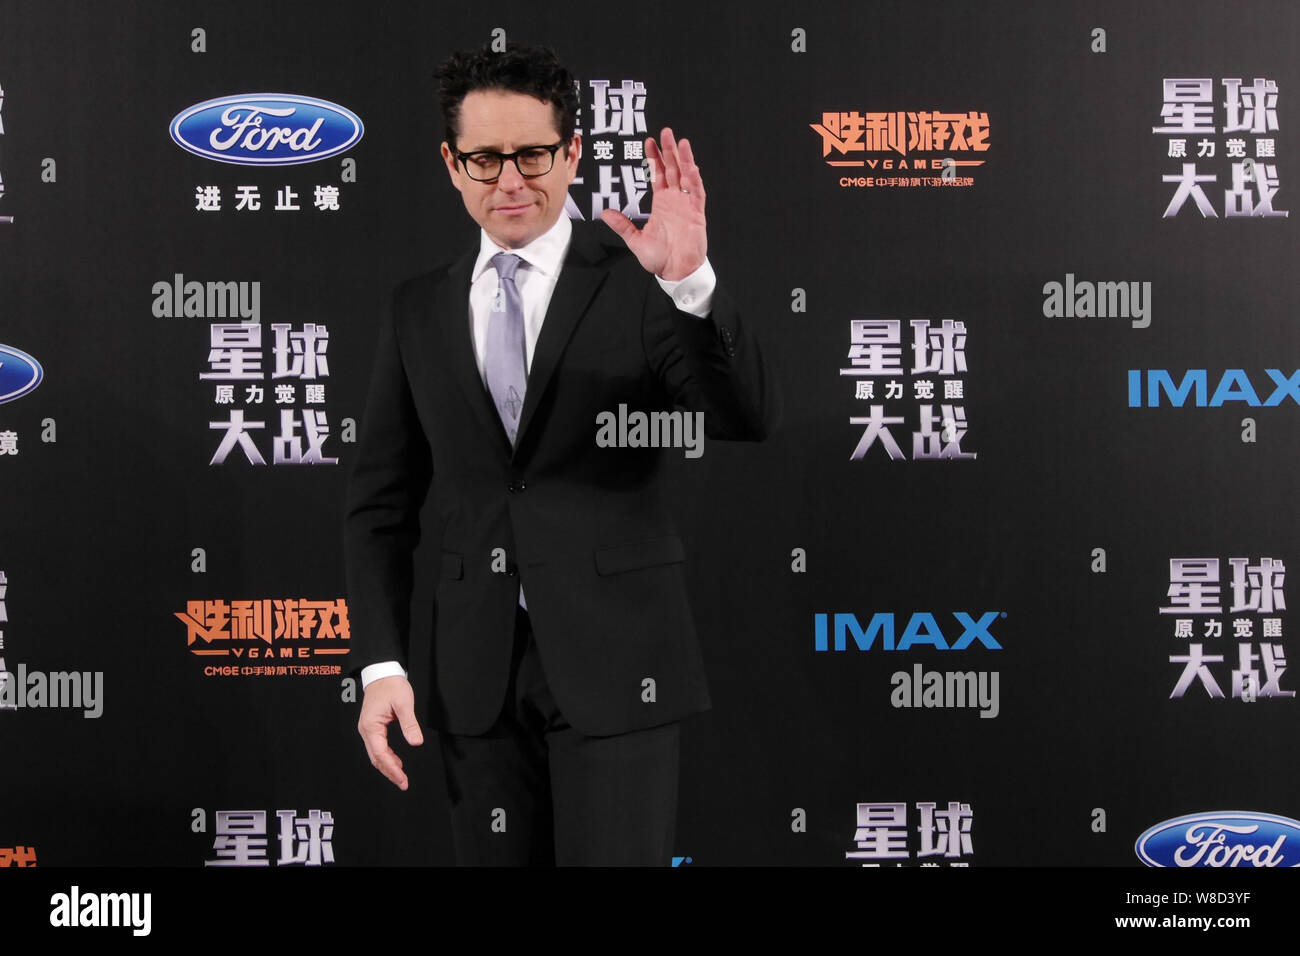 American director J. J. Abrams waves during a premiere for his movie 'Star Wars: The Force Awakens' in Shanghai, China, 27 December 2015. Stock Photo